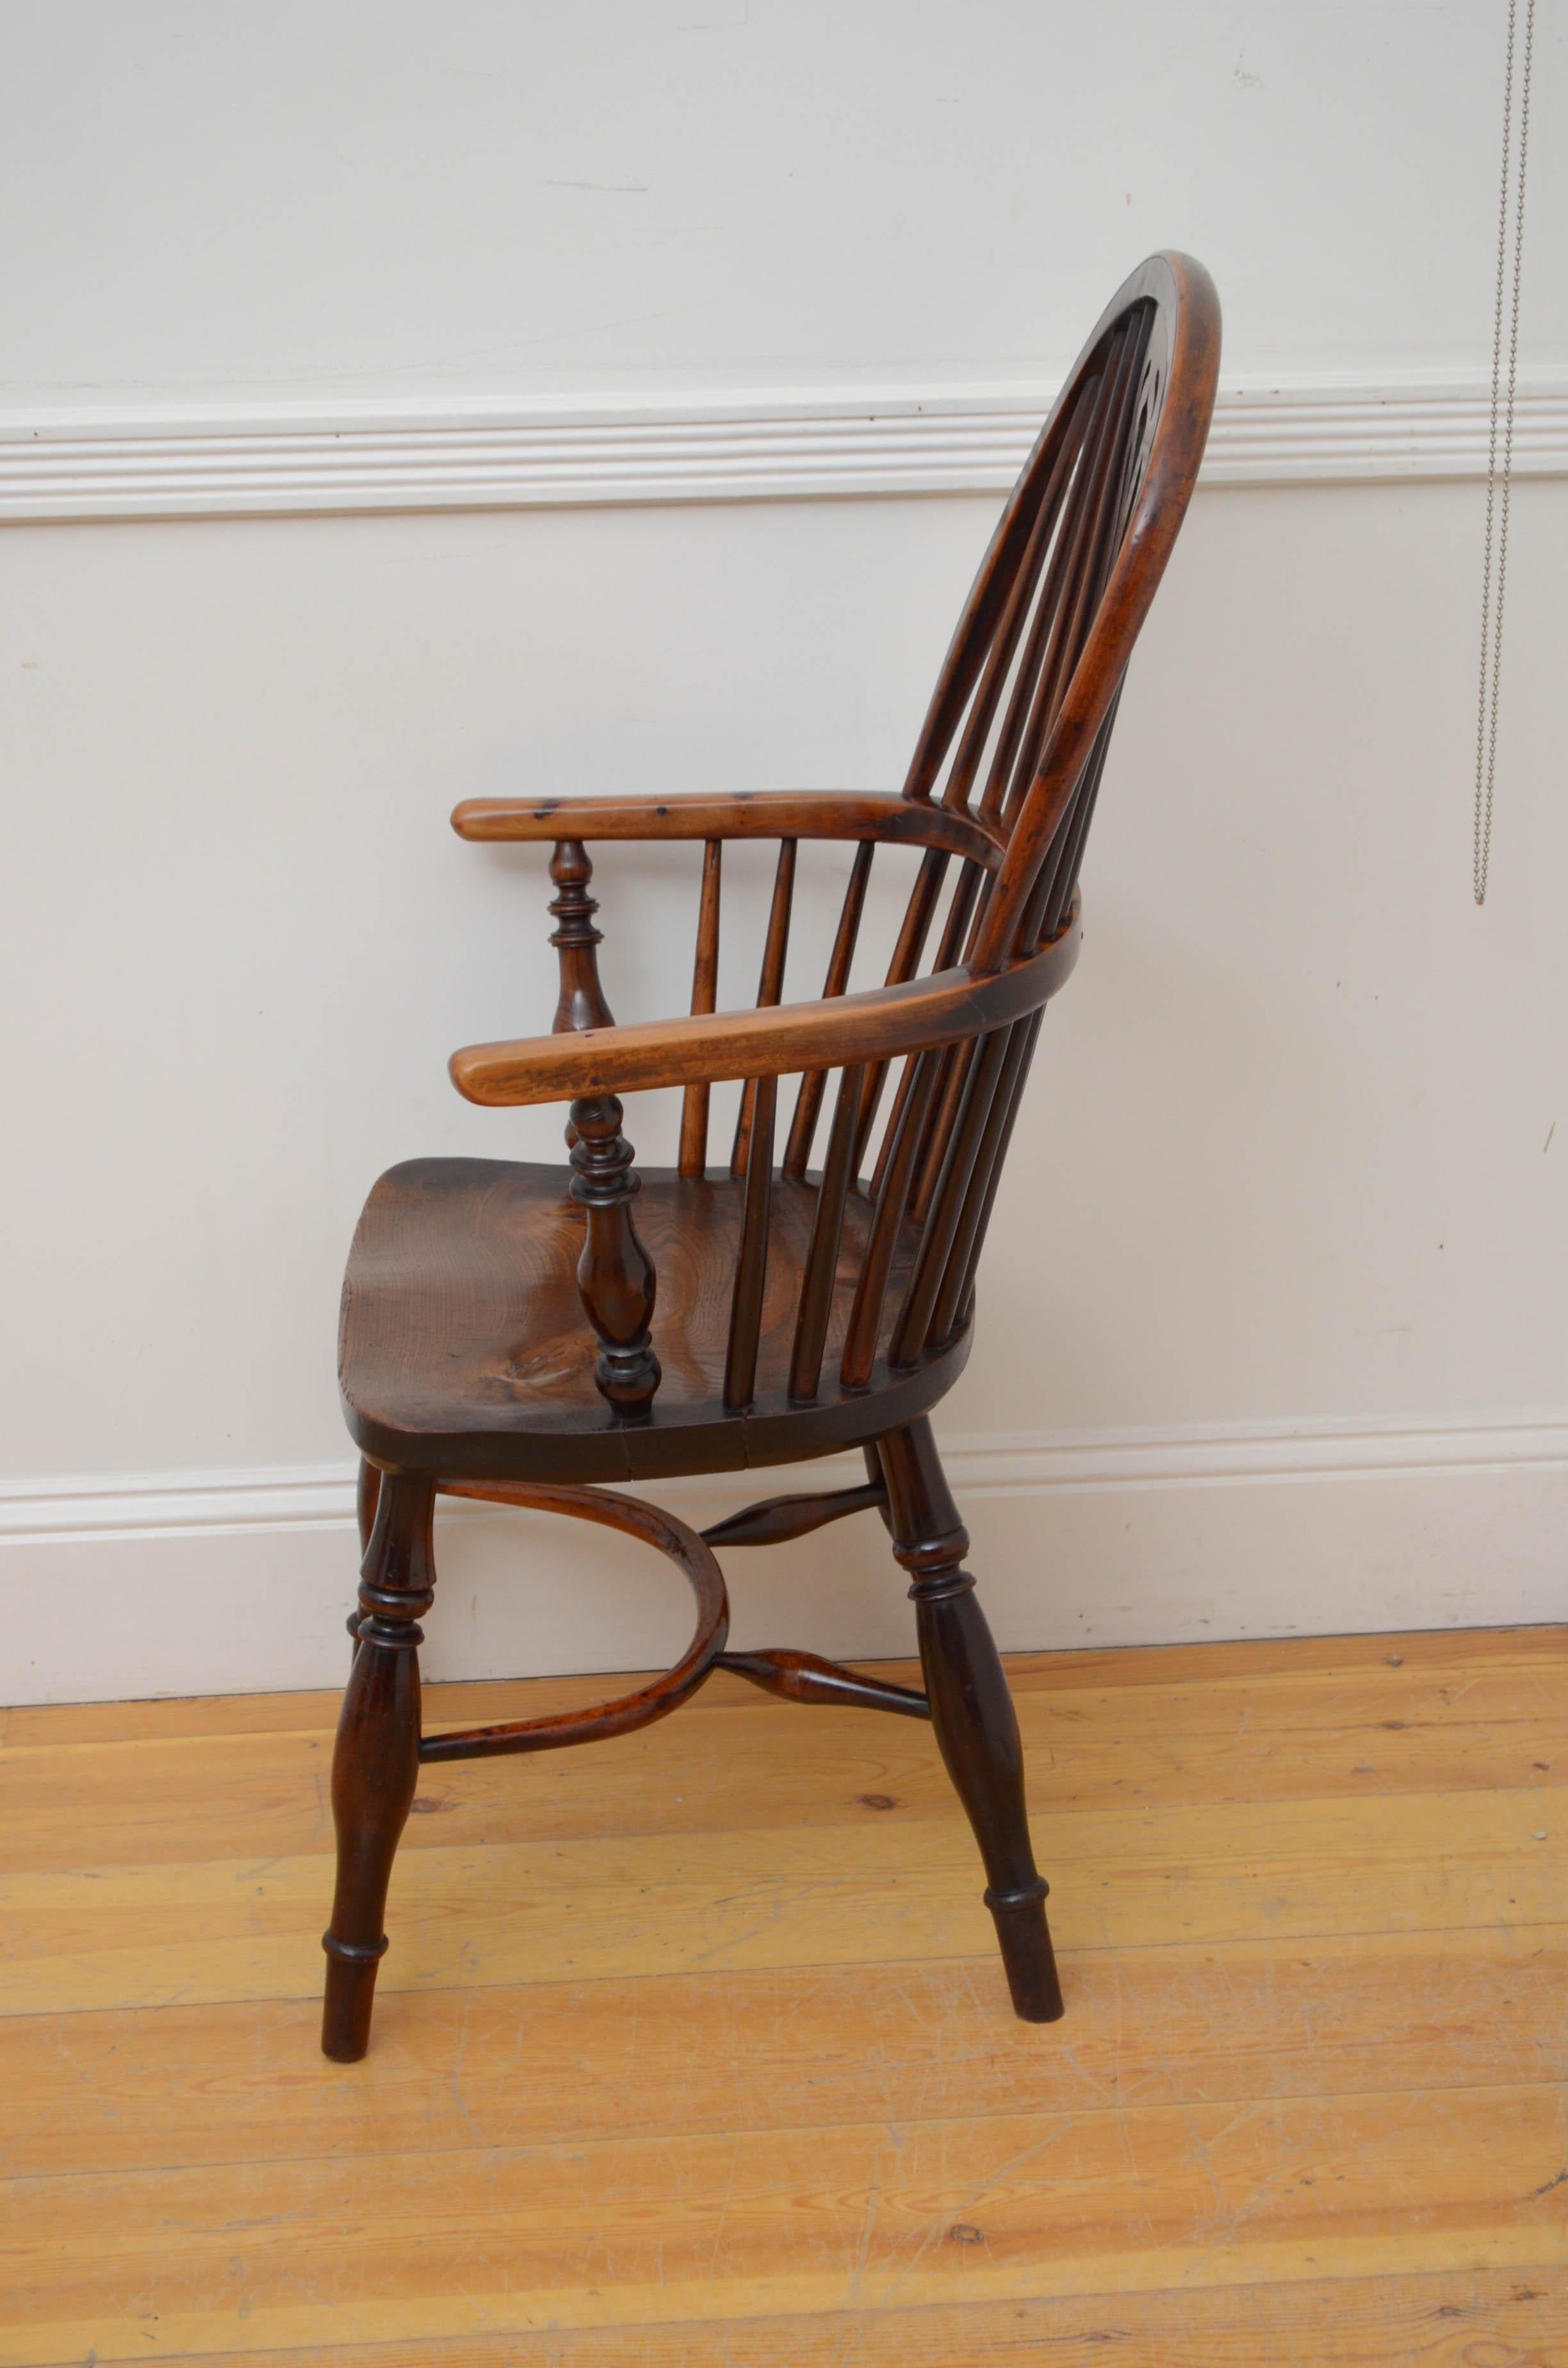 Sn5506 Early Victorian yew and elm wood Windsor chair, having arched back with centre splat flanked by spindles, open arms and shaped seat, standing on turned legs united by crinoline stretchers. This antique chair is in home ready condition.